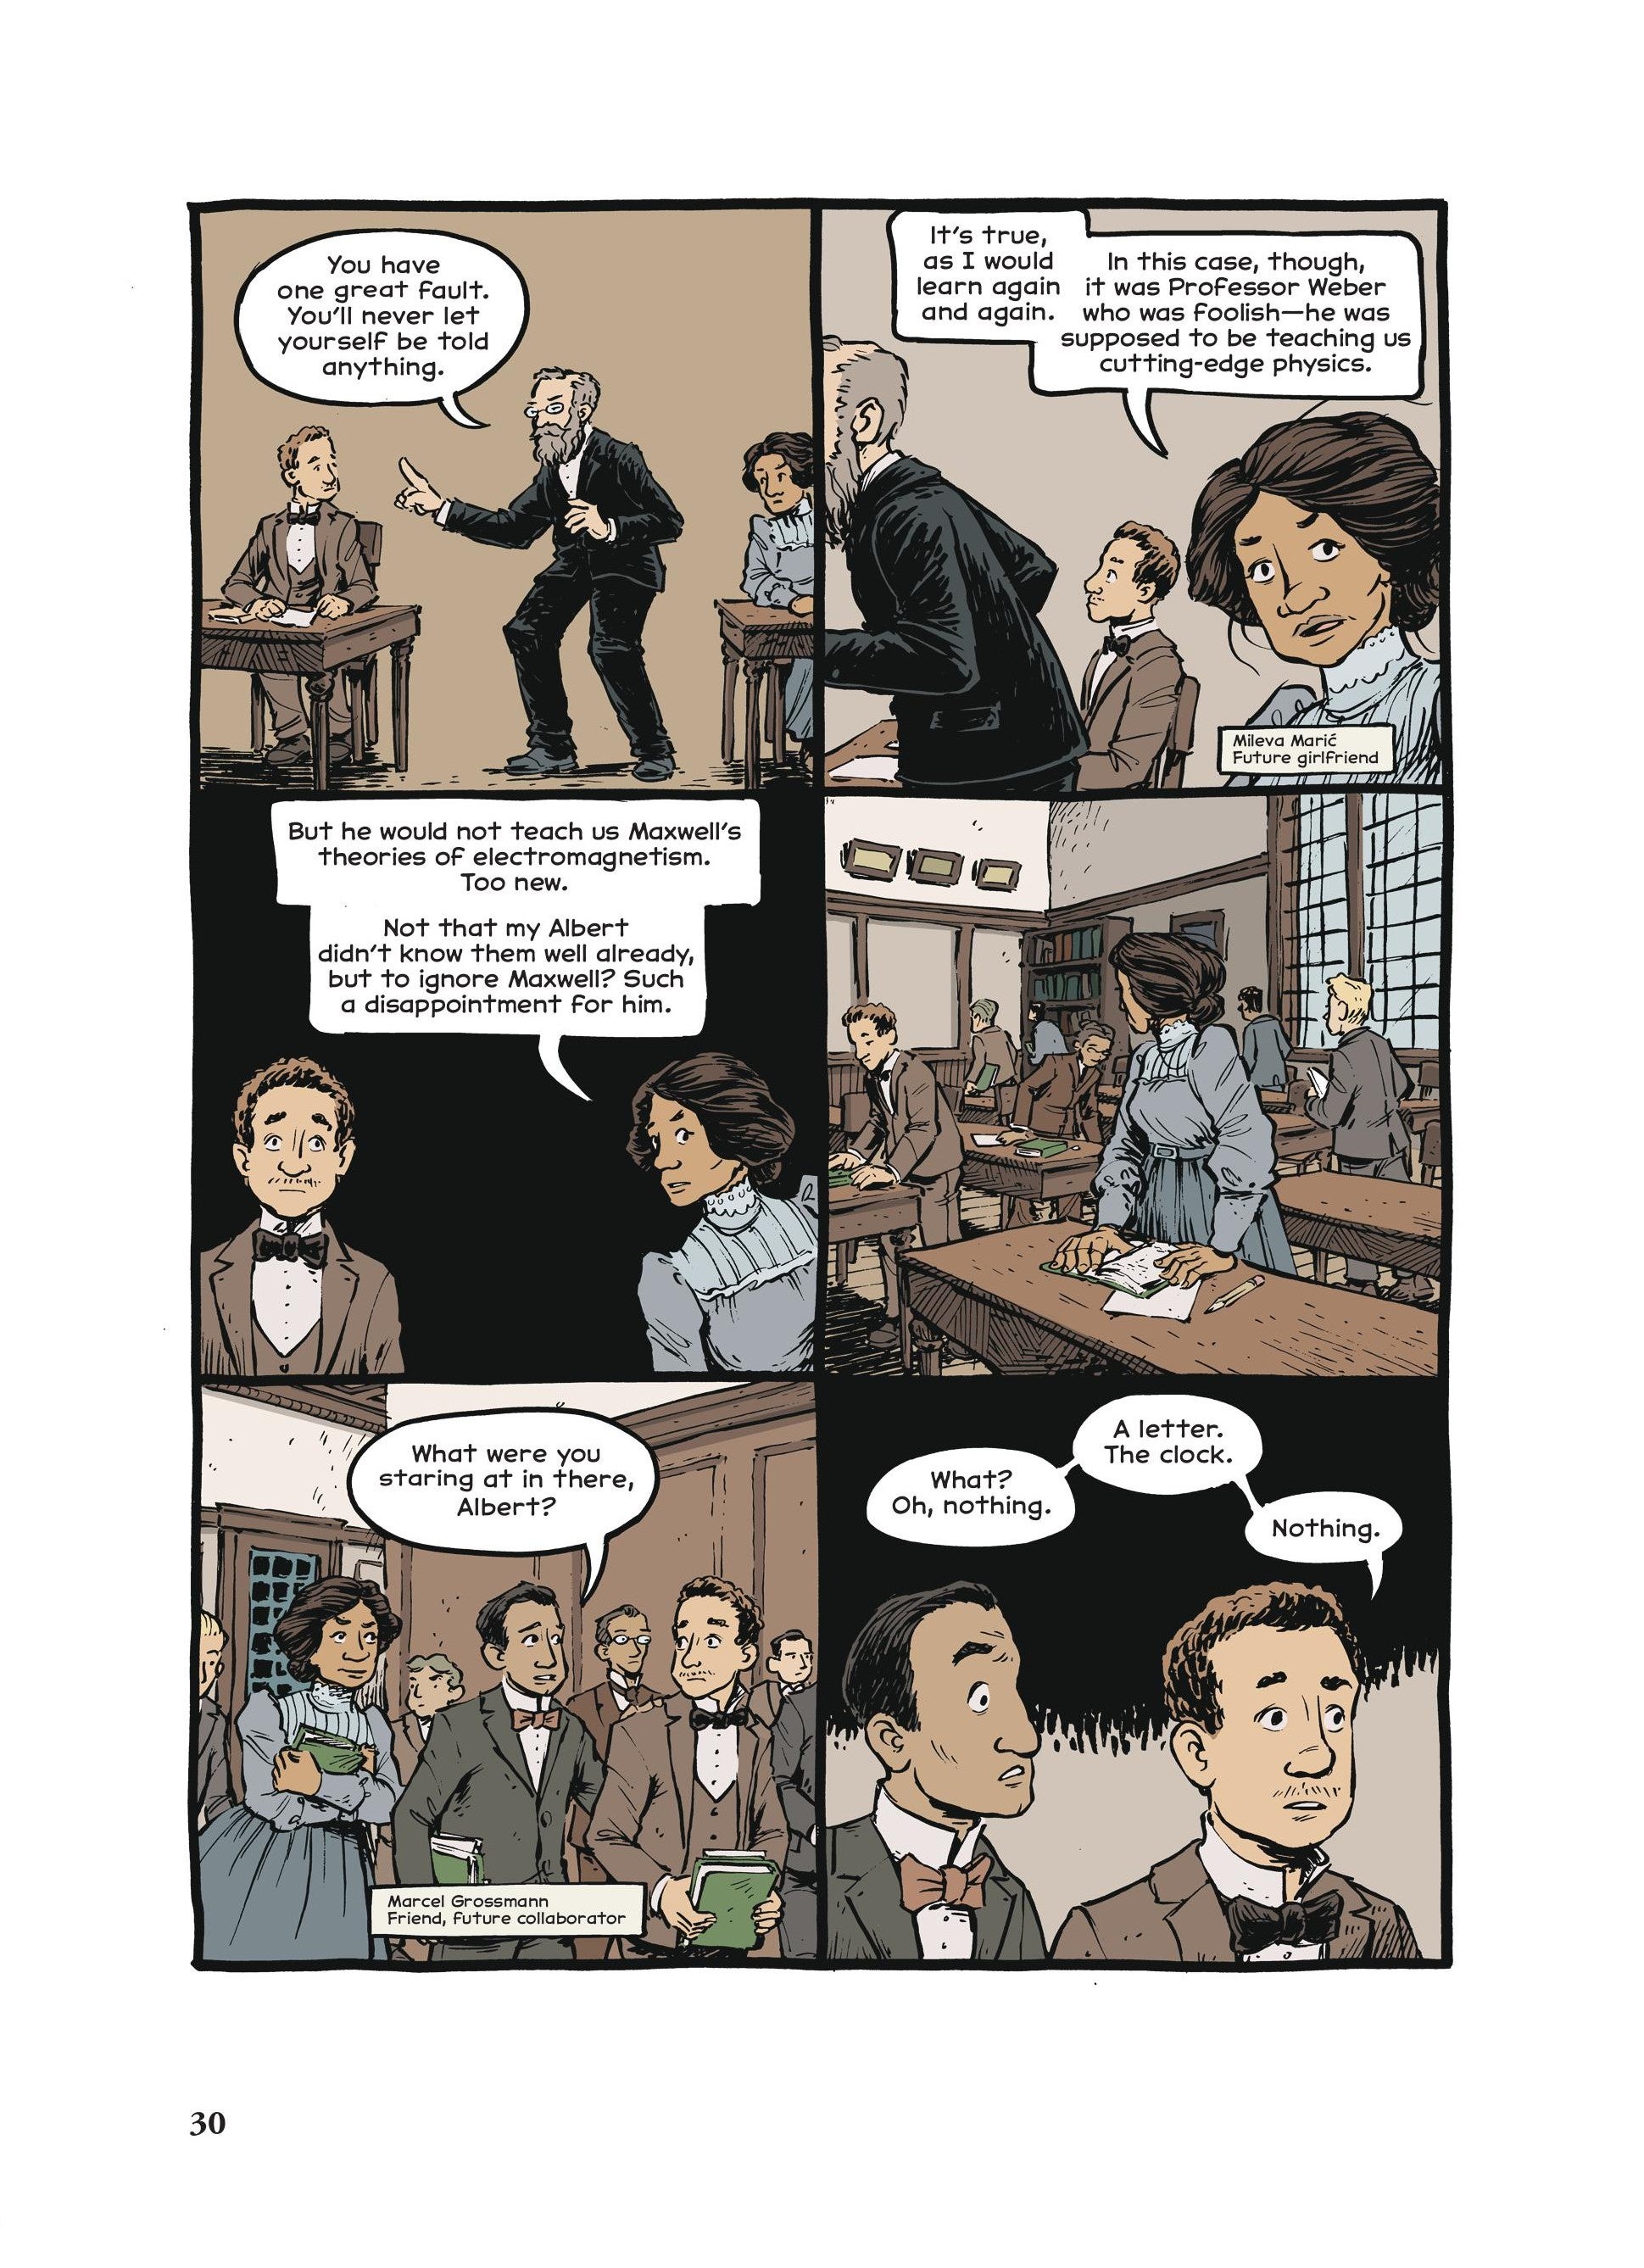 Comics page featuring Einstein being reprimanded by a professor, as Mileva Maric explains the situation to the reader